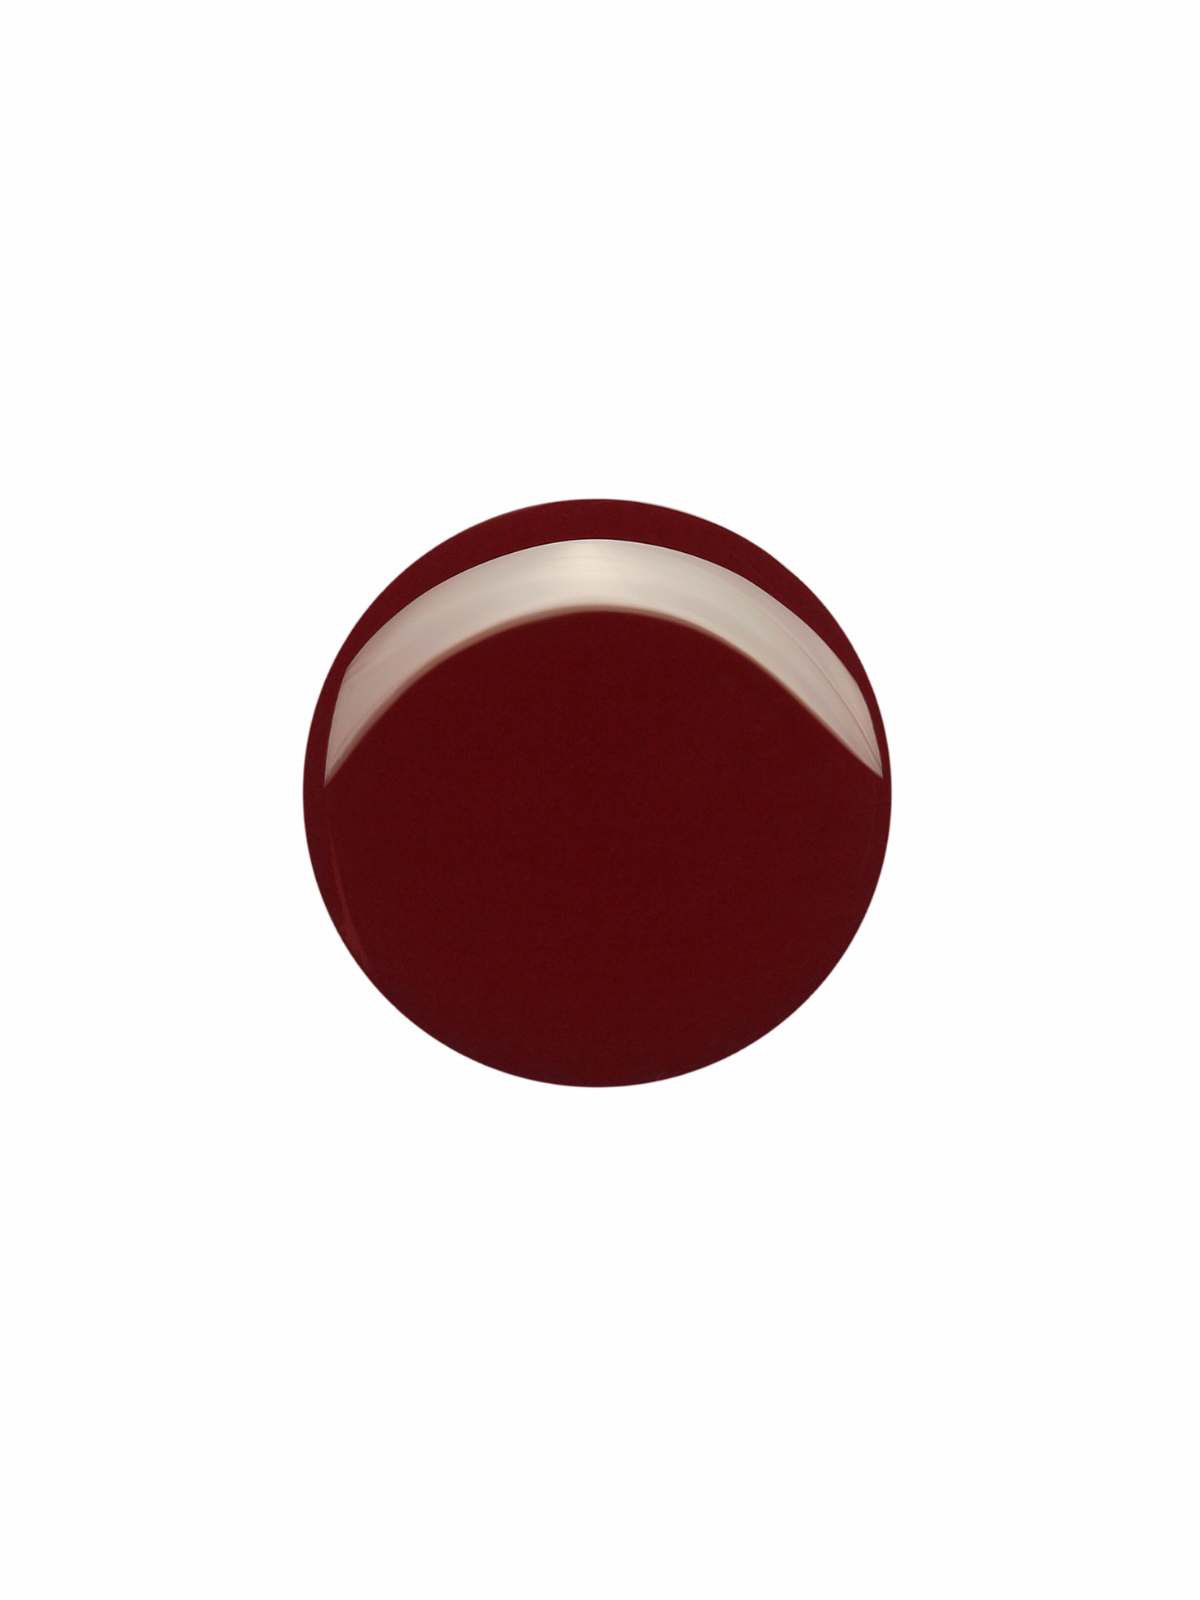 NUI_NailColor_05_darkred_2_smear.png